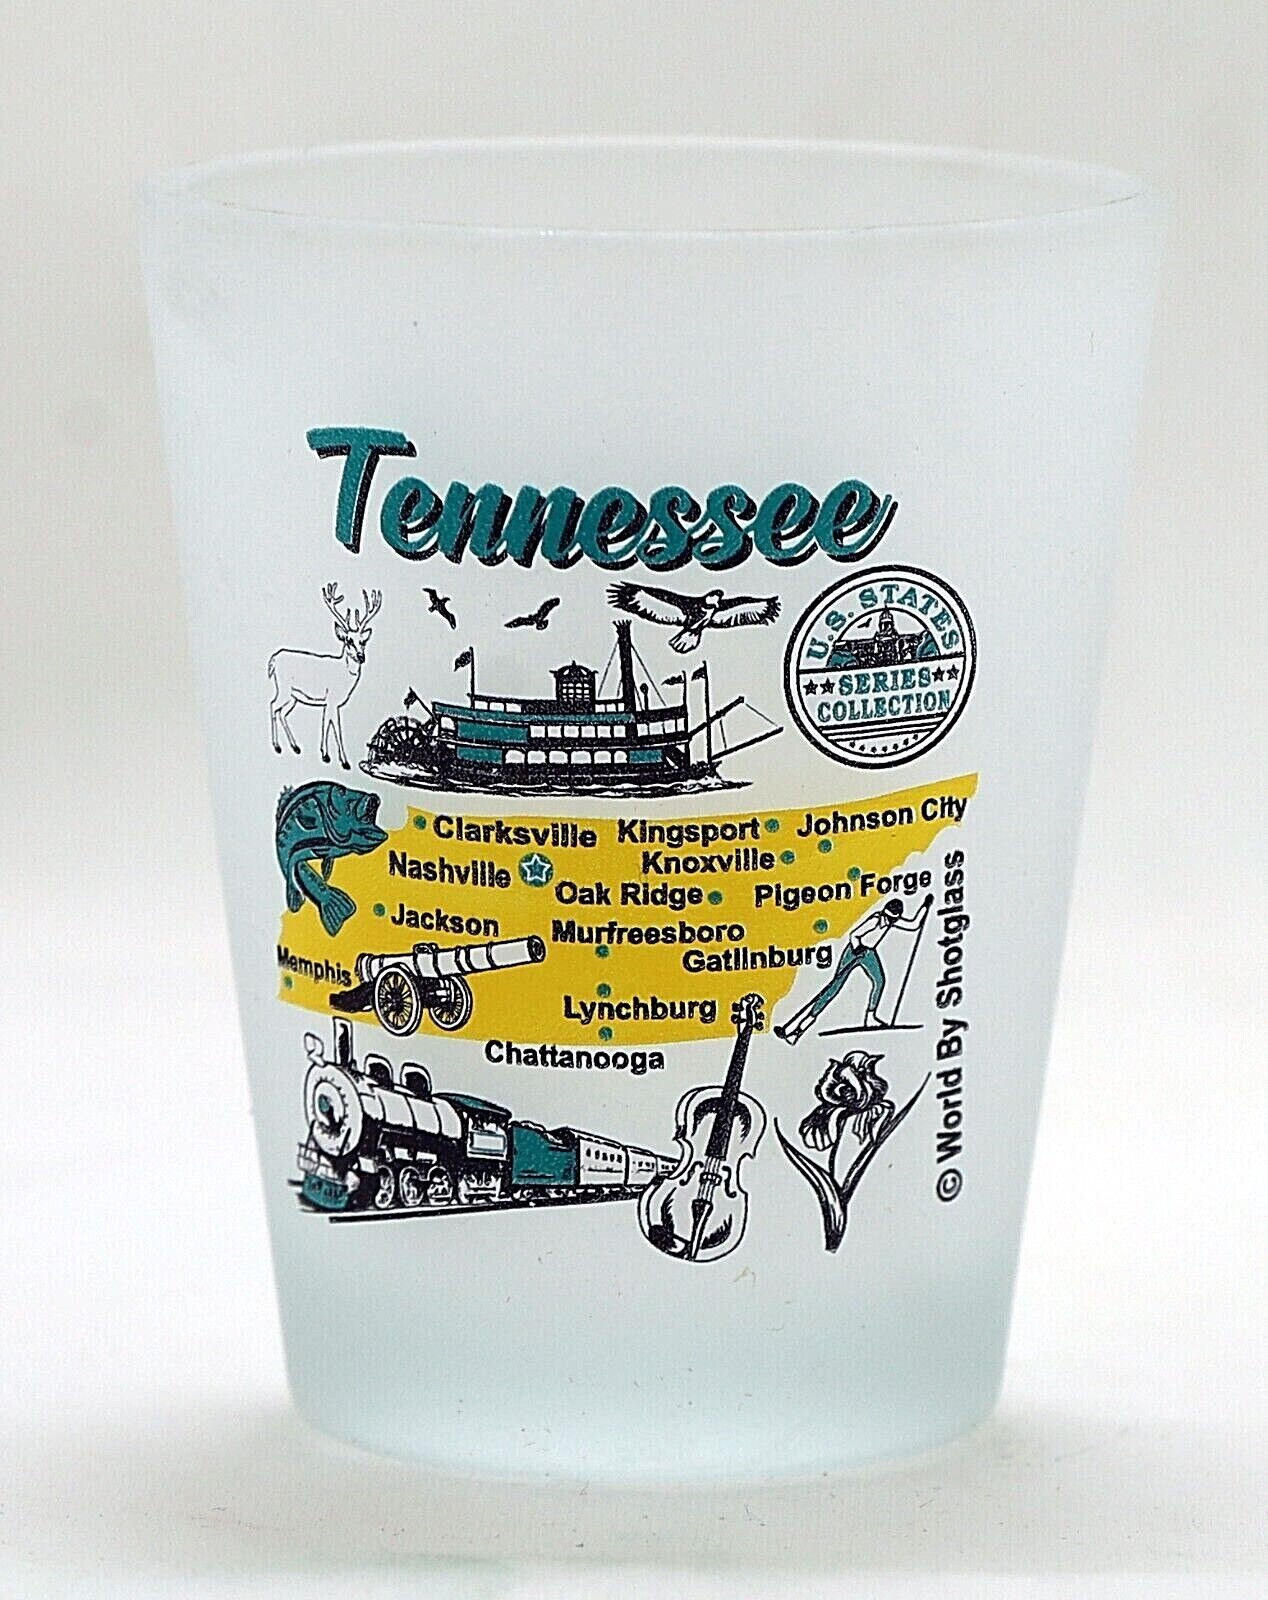 Tennessee US States Series Collection Shot Glass